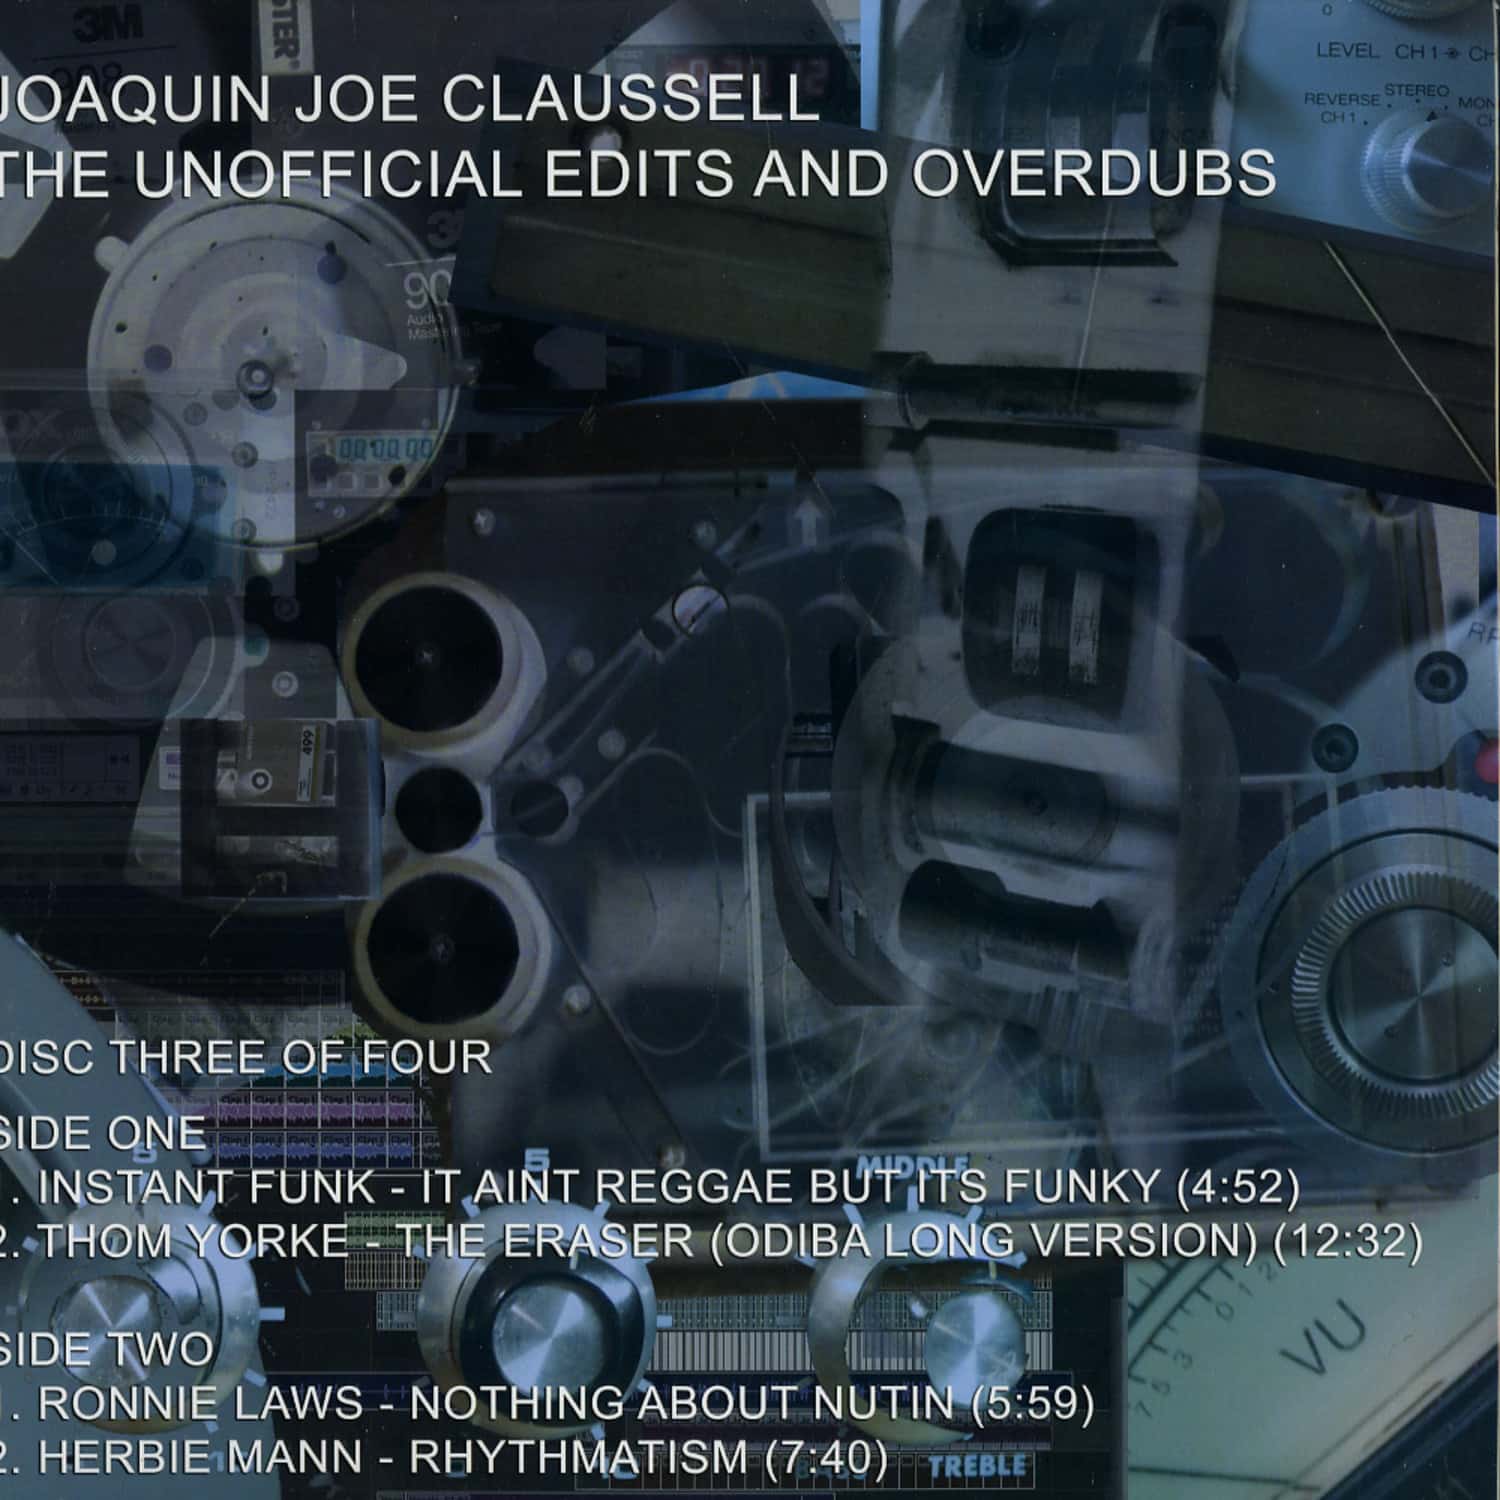 Joaquin Joe Claussell - THE UNOFFICIAL EDITS AND OVERDUBS PART 3